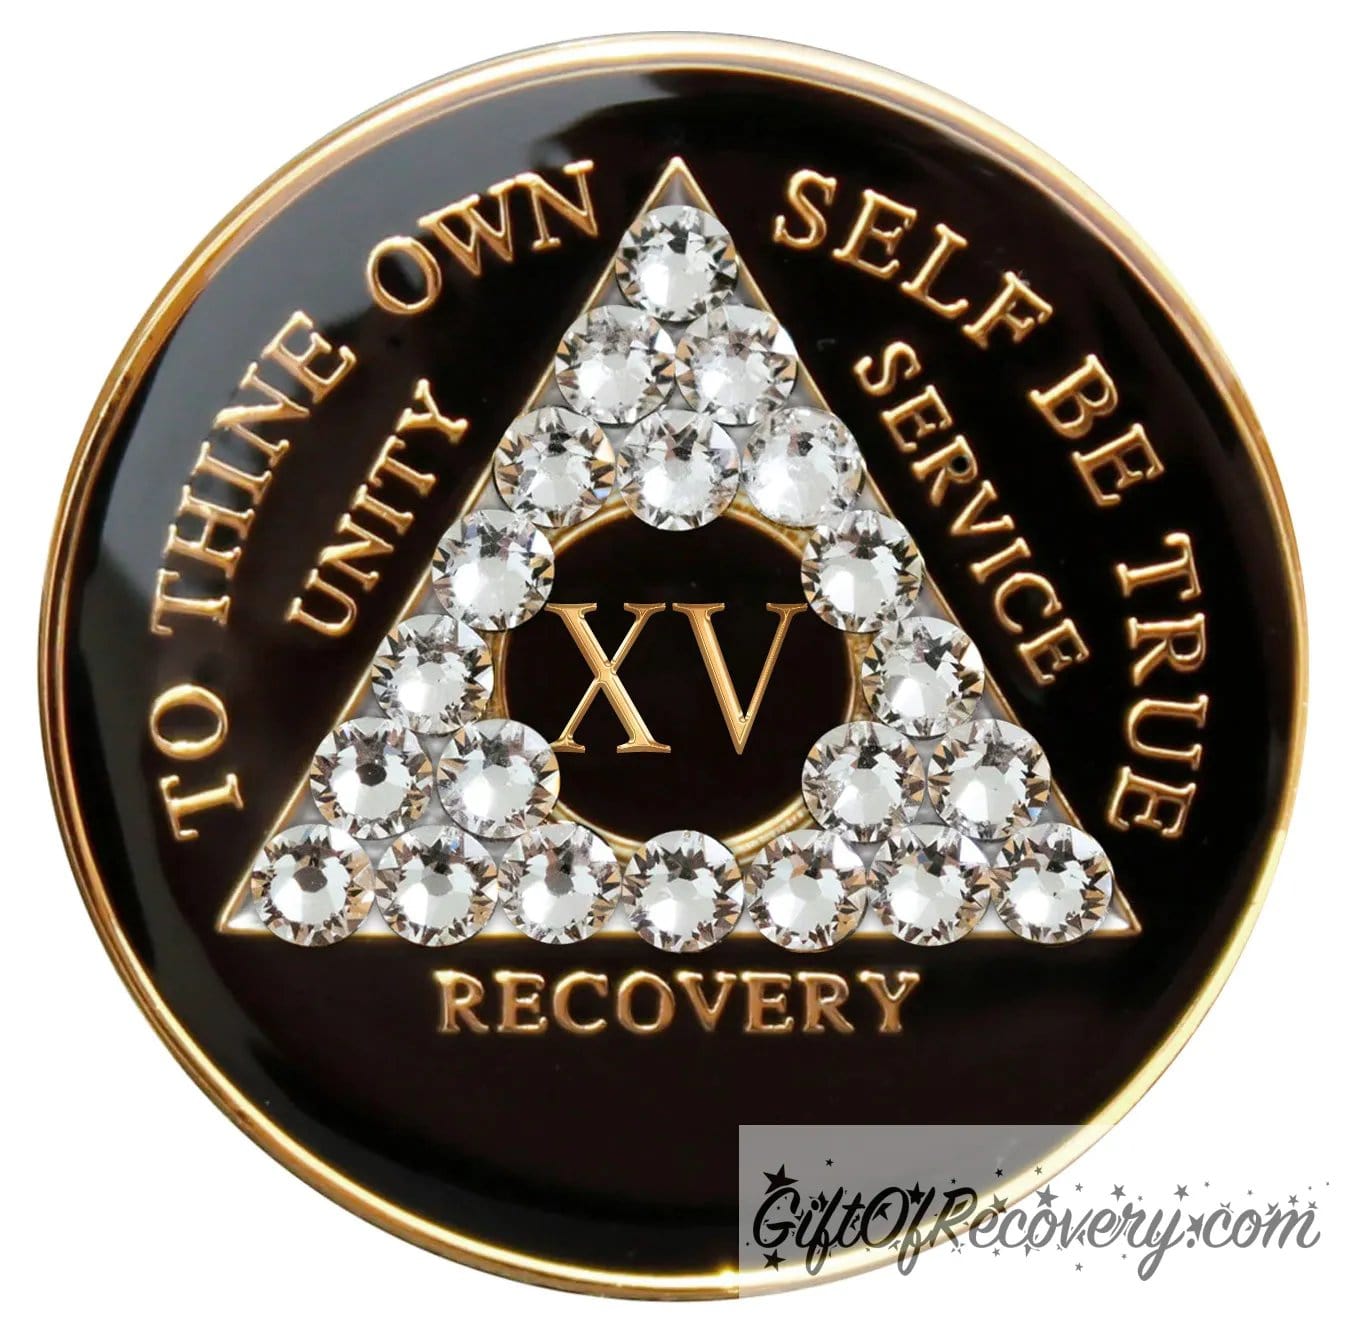 15 year AA medallion black onyx with 21 clear genuine crystals in the shape of the triangle, to thine own self be true, unity, service, recovery, and the roman numeral are embossed with 14k gold-plated brass, the recovery medallion is sealed with resin for a glossy finish that will last and is scratch proof.